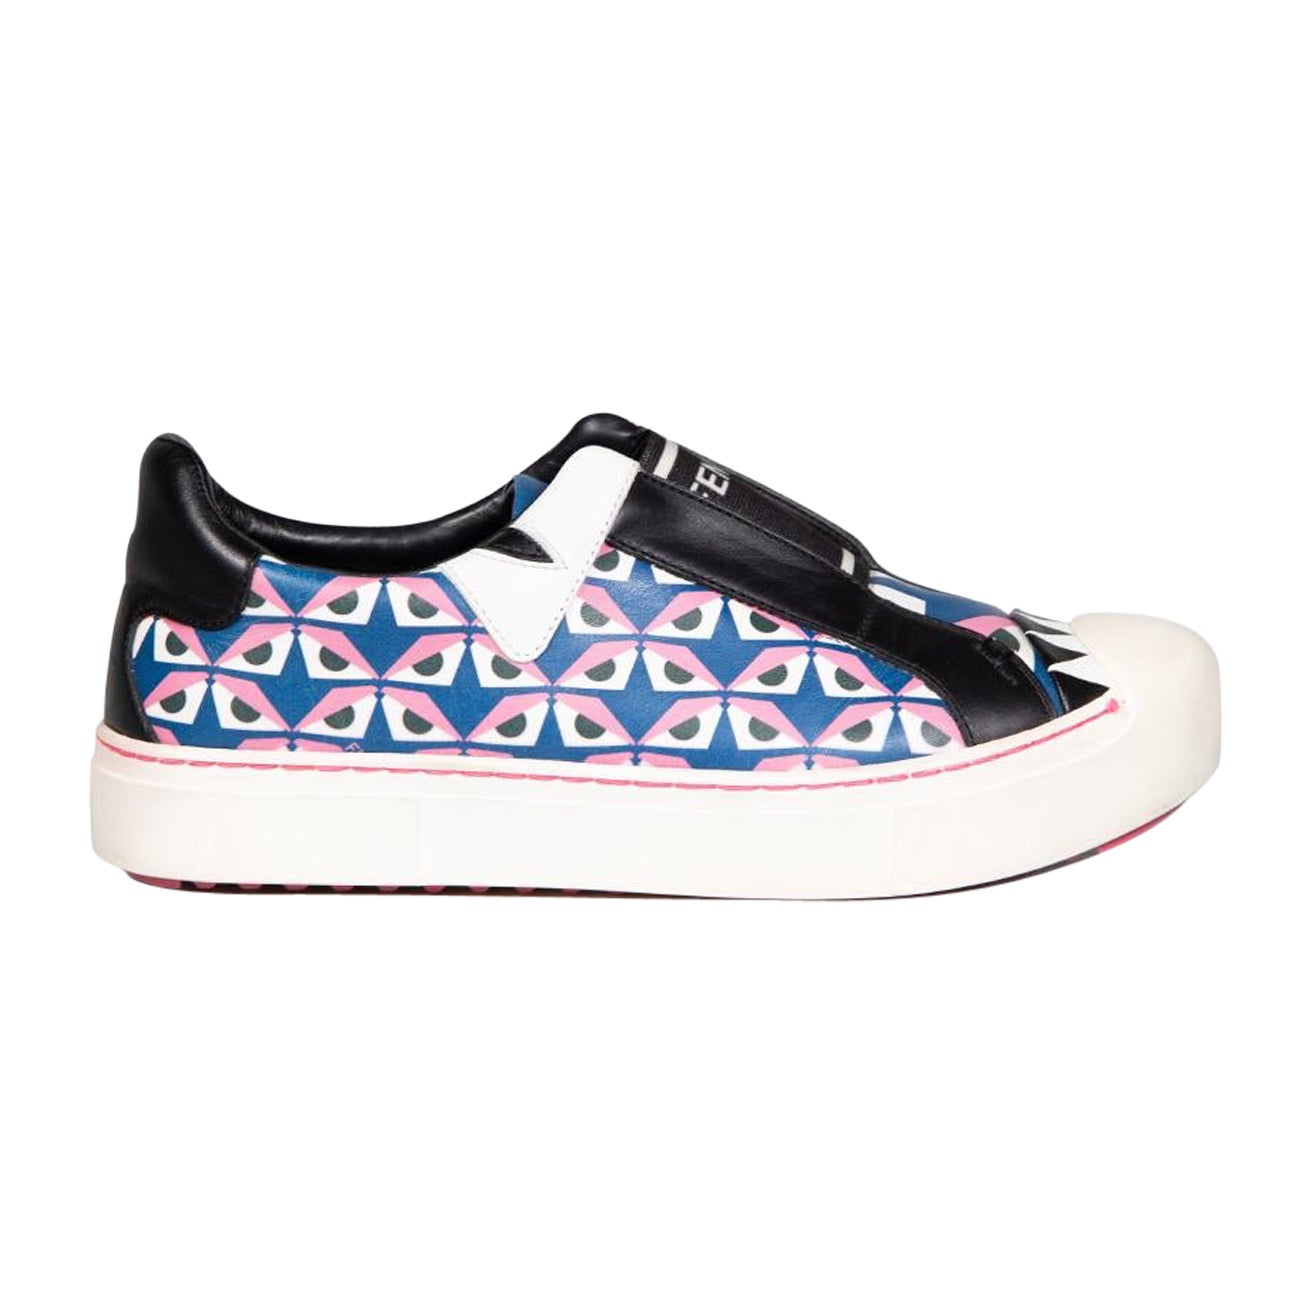 Fendi Bug Eye Print Leather Slip On Trainers Size IT 36 For Sale